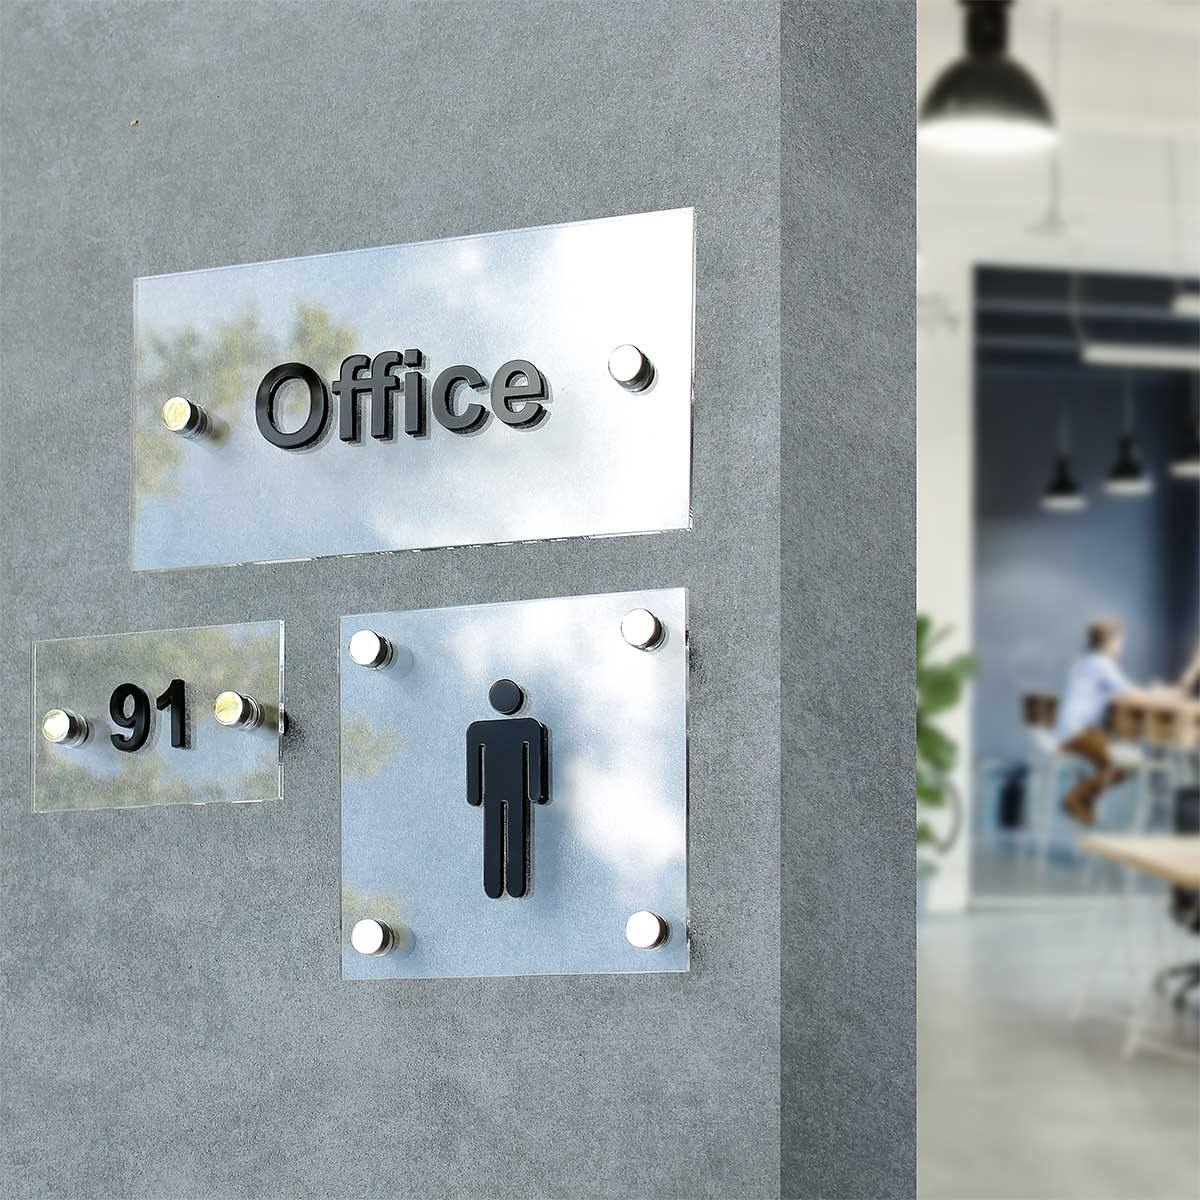 Kitchen Door Sign for Office Information signs transparent acrylic and black arylic letters Bsign